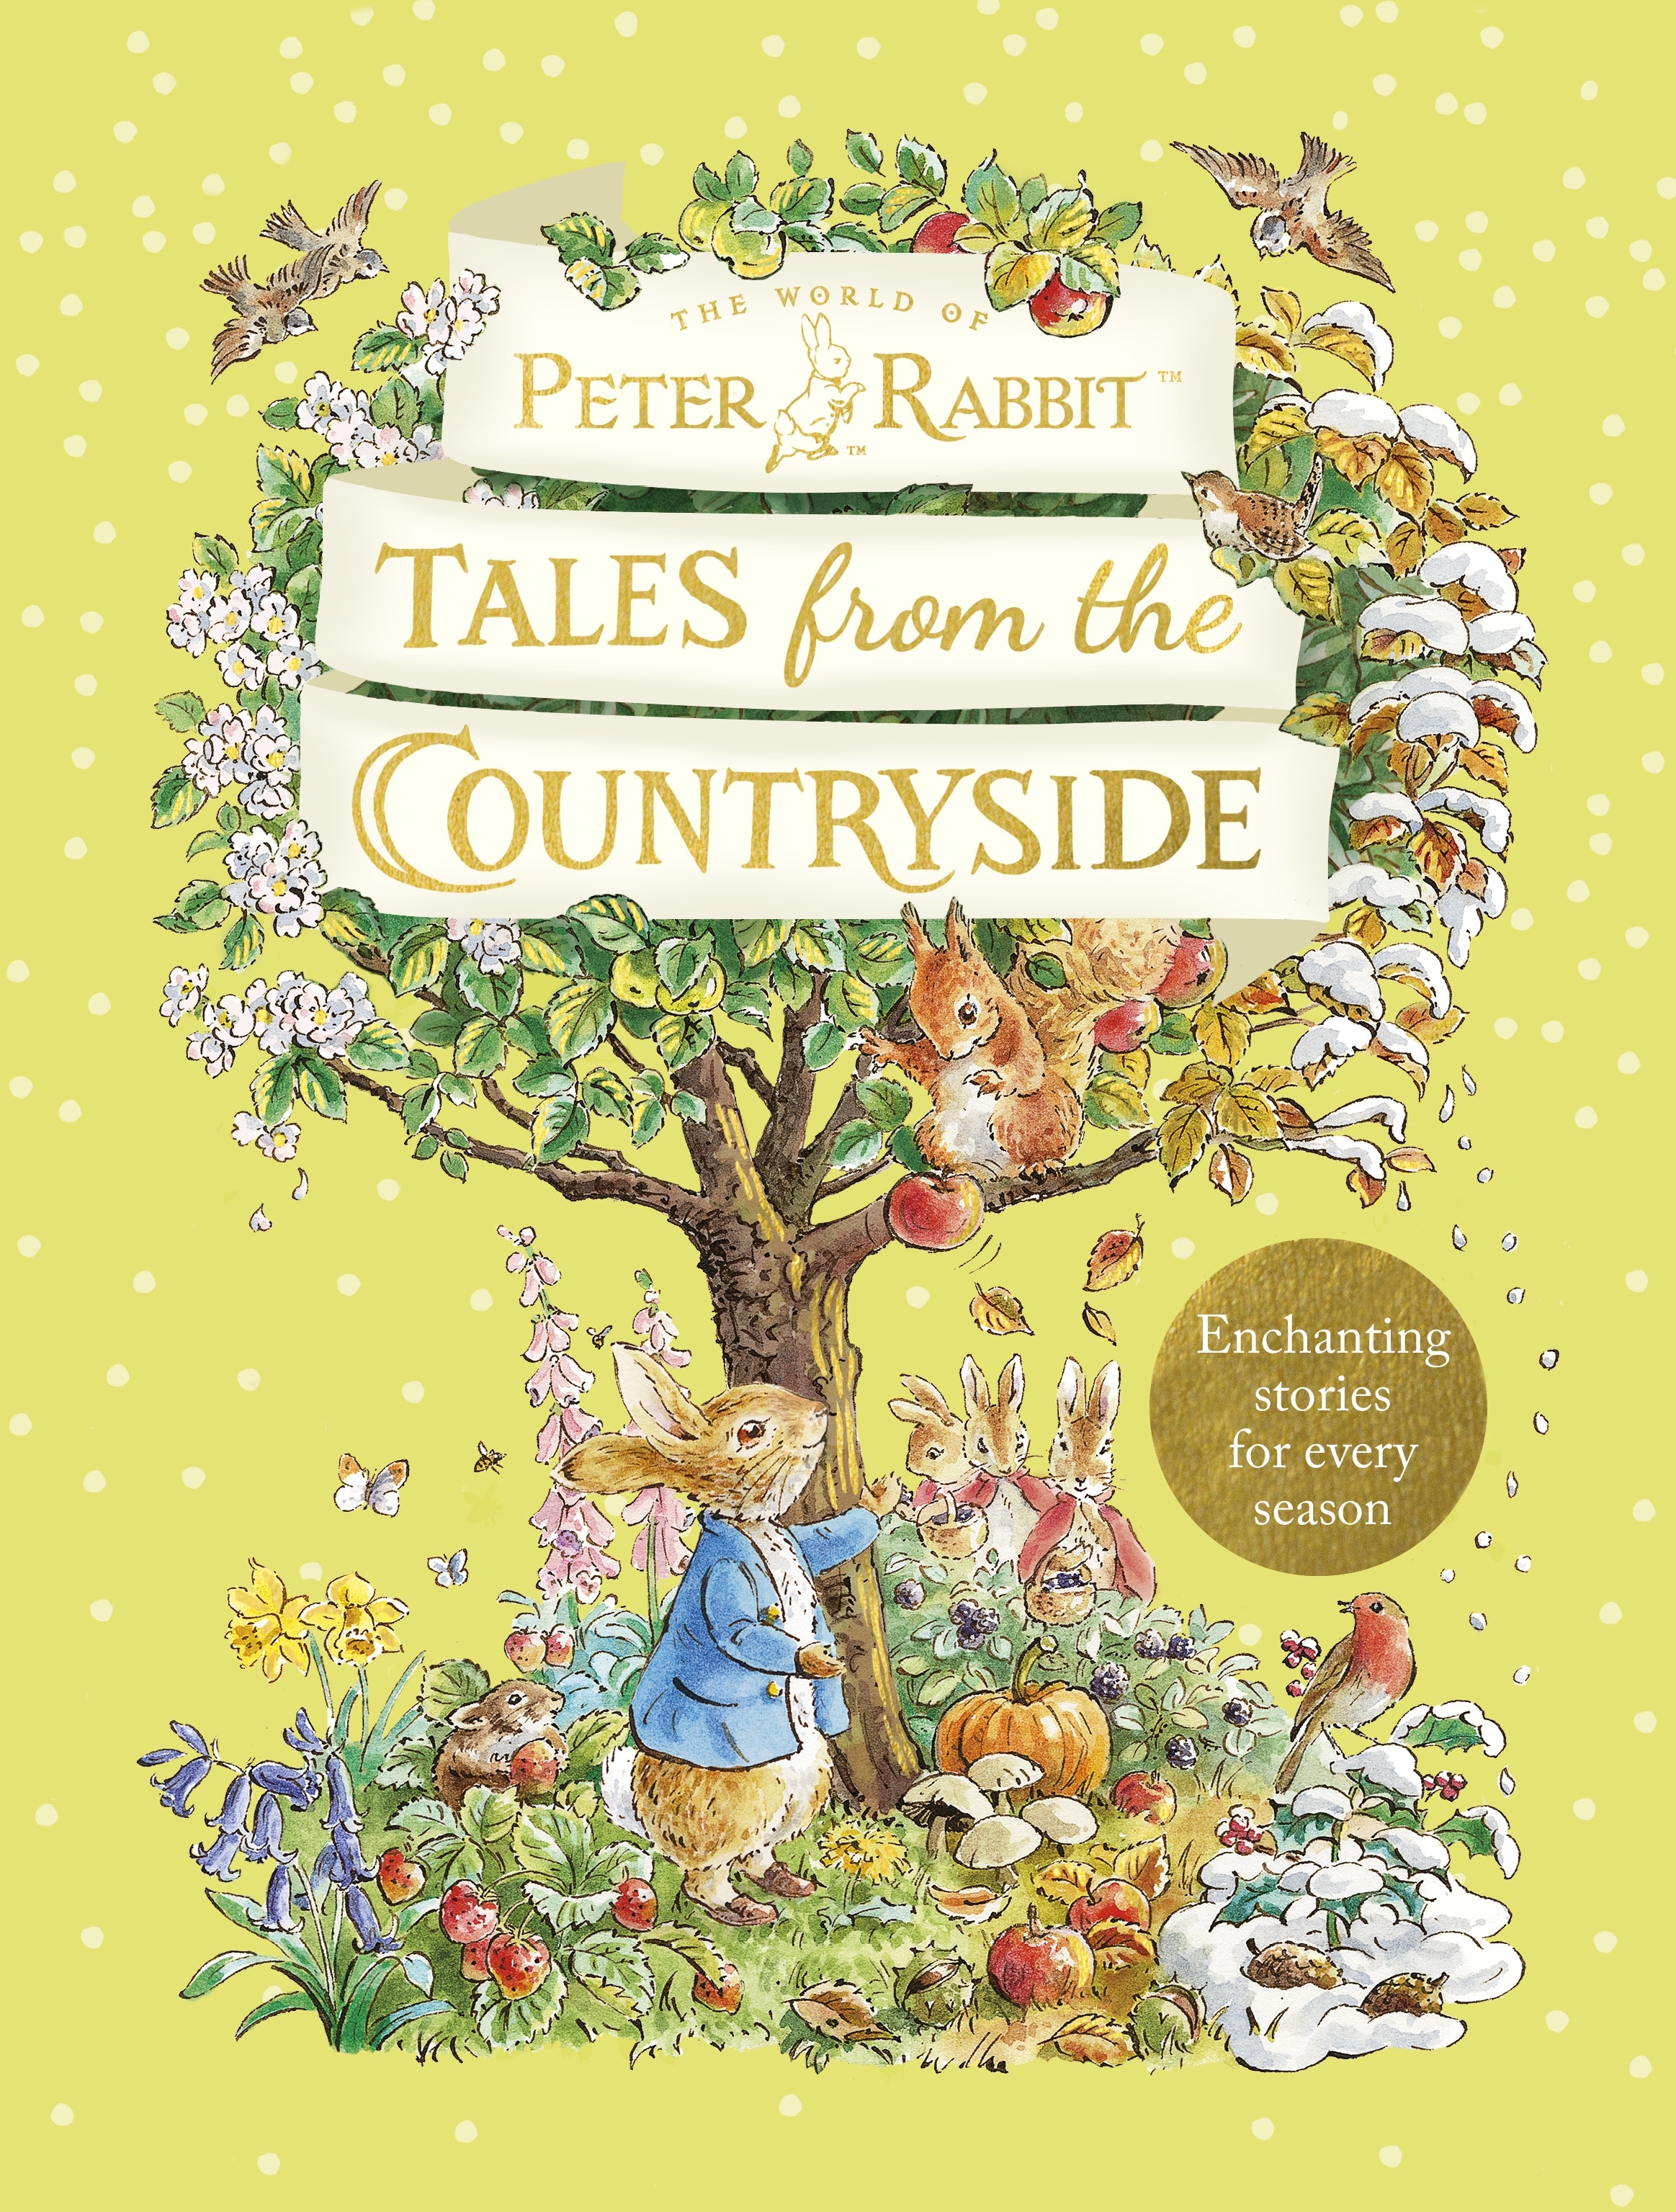 Book “Peter Rabbit: Tales from the Countryside” by Beatrix Potter — October 27, 2022